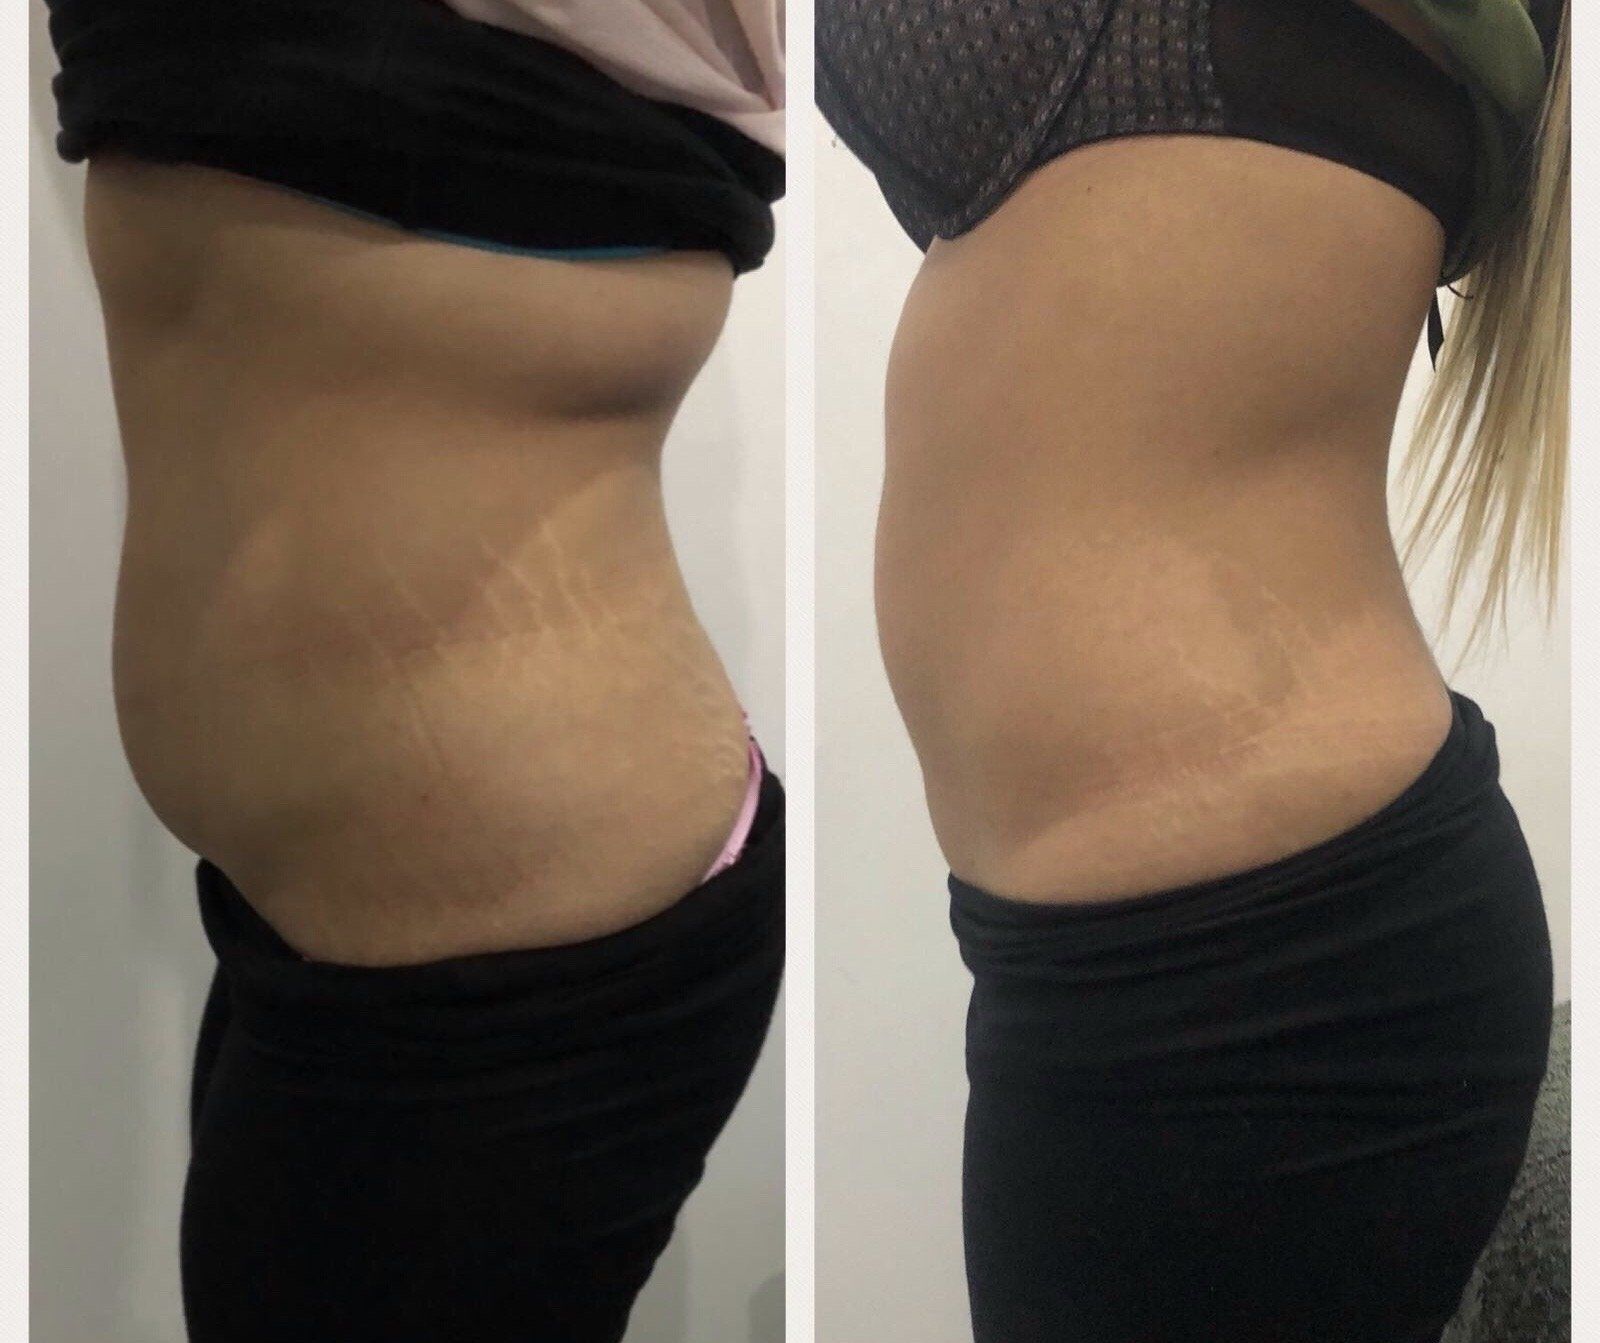 Side by side picture of before and after fat loss treatments showing the belly